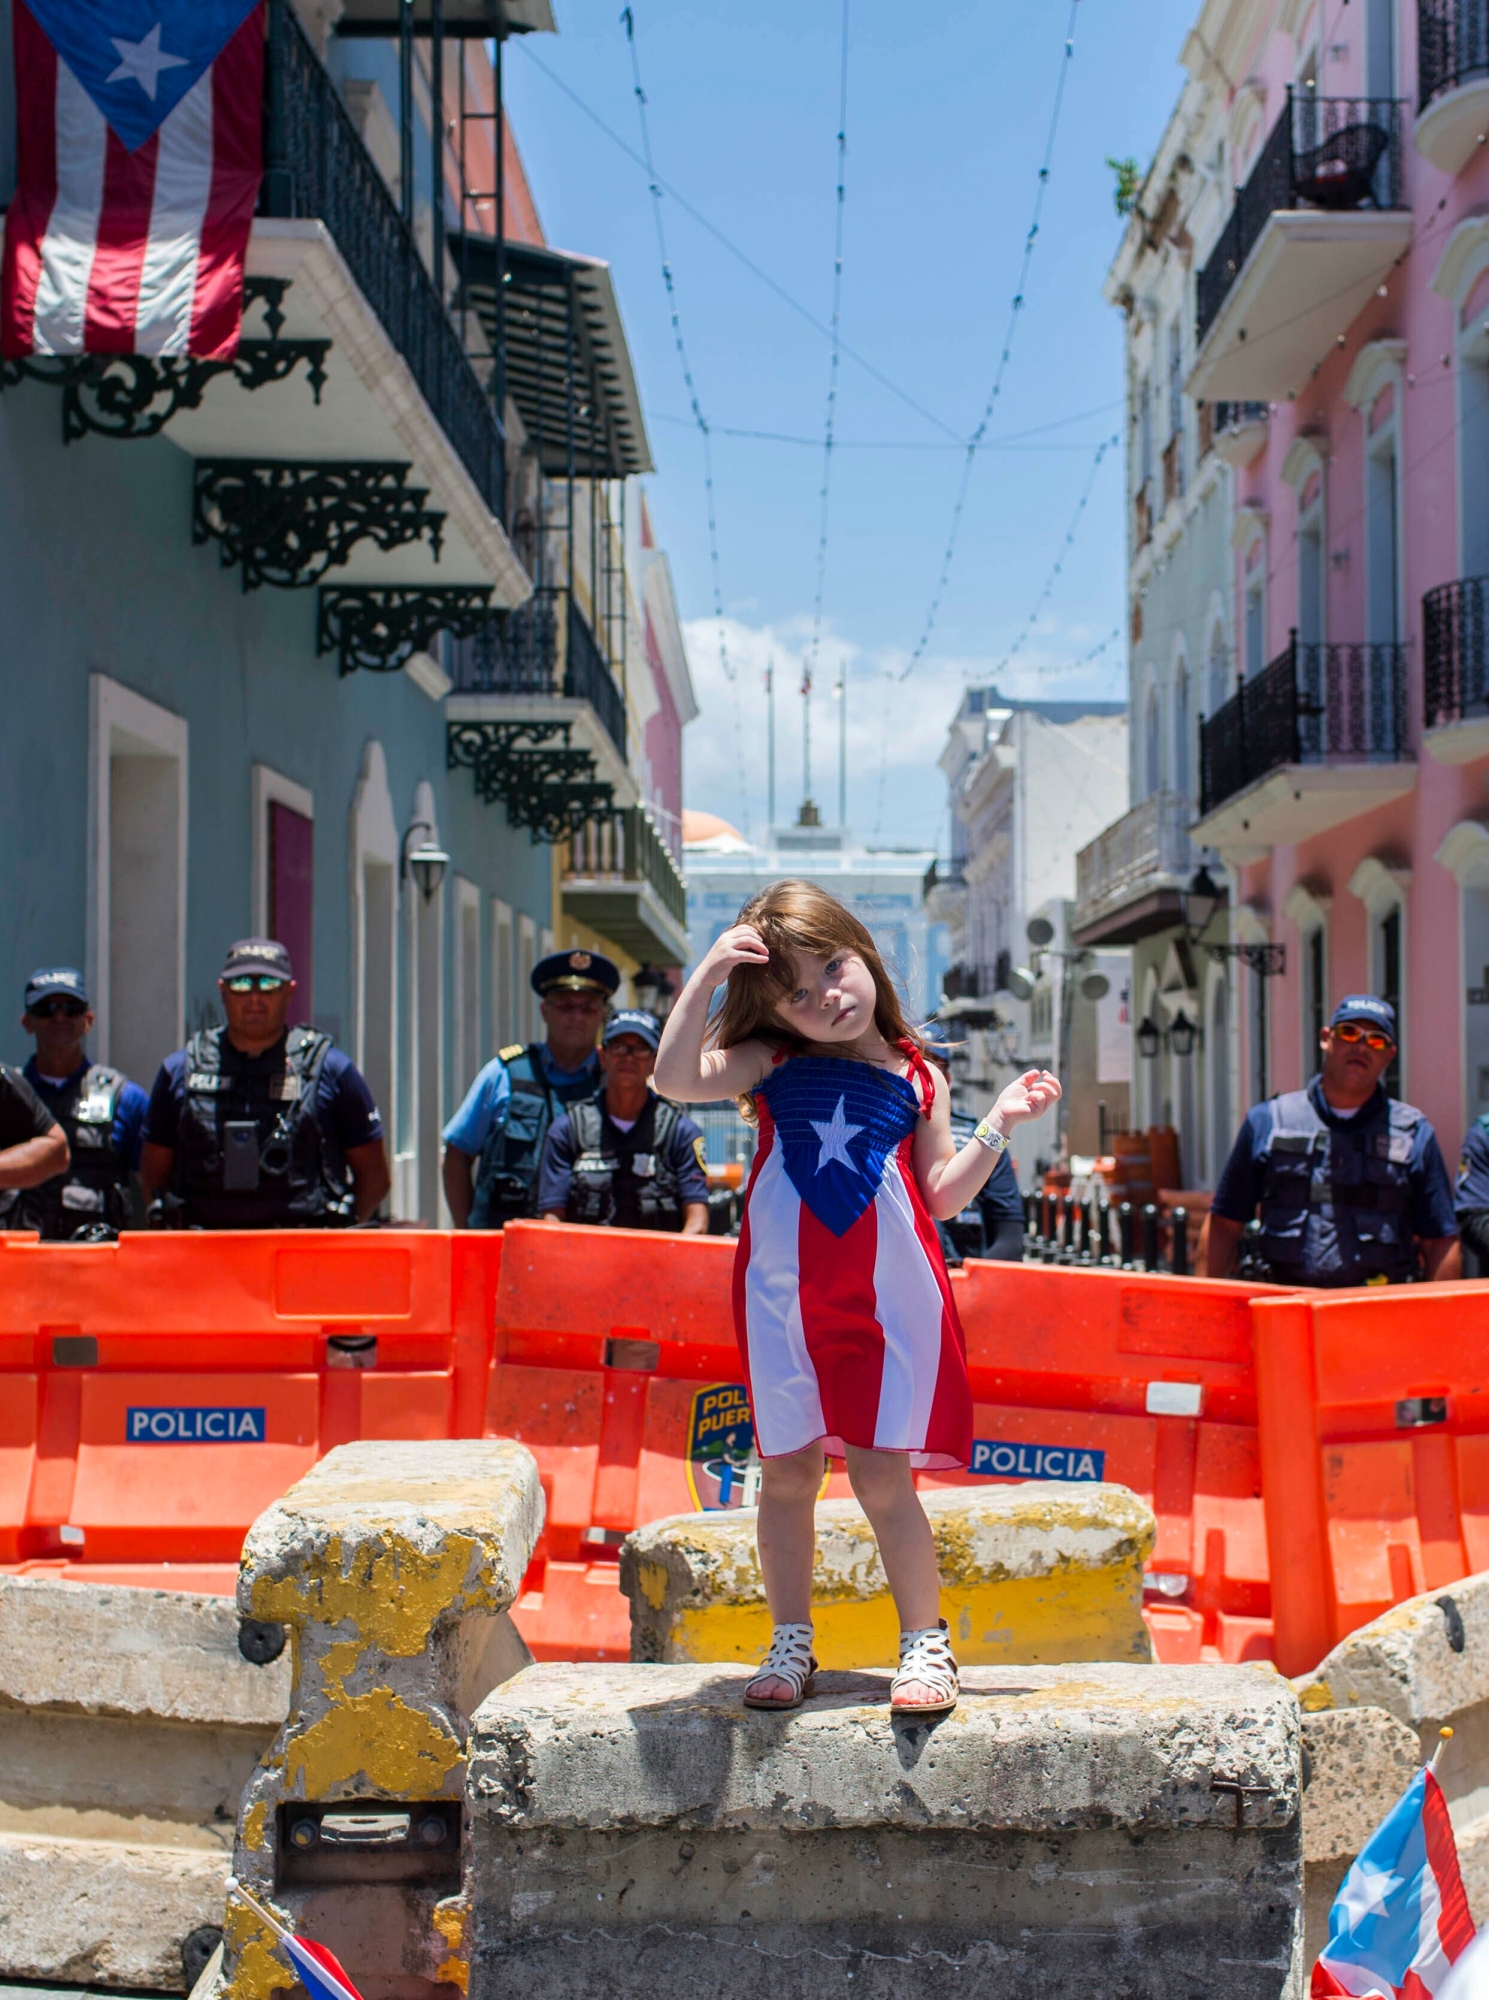 A girl wearing a dress featuring the Puerto Rican flag stands by police blocking the road leading to the La Fortaleza governors mansion in San Juan, Puerto Rico, Thursday, July 18, 2019. Protesters are demanding Gov. Ricardo Rossello resign after the leak of online chats that show him making misogynistic slurs and mocking his constituents. (AP Photo/Dennis M. Rivera Pichardo) PUERTO RICO PROTESTS